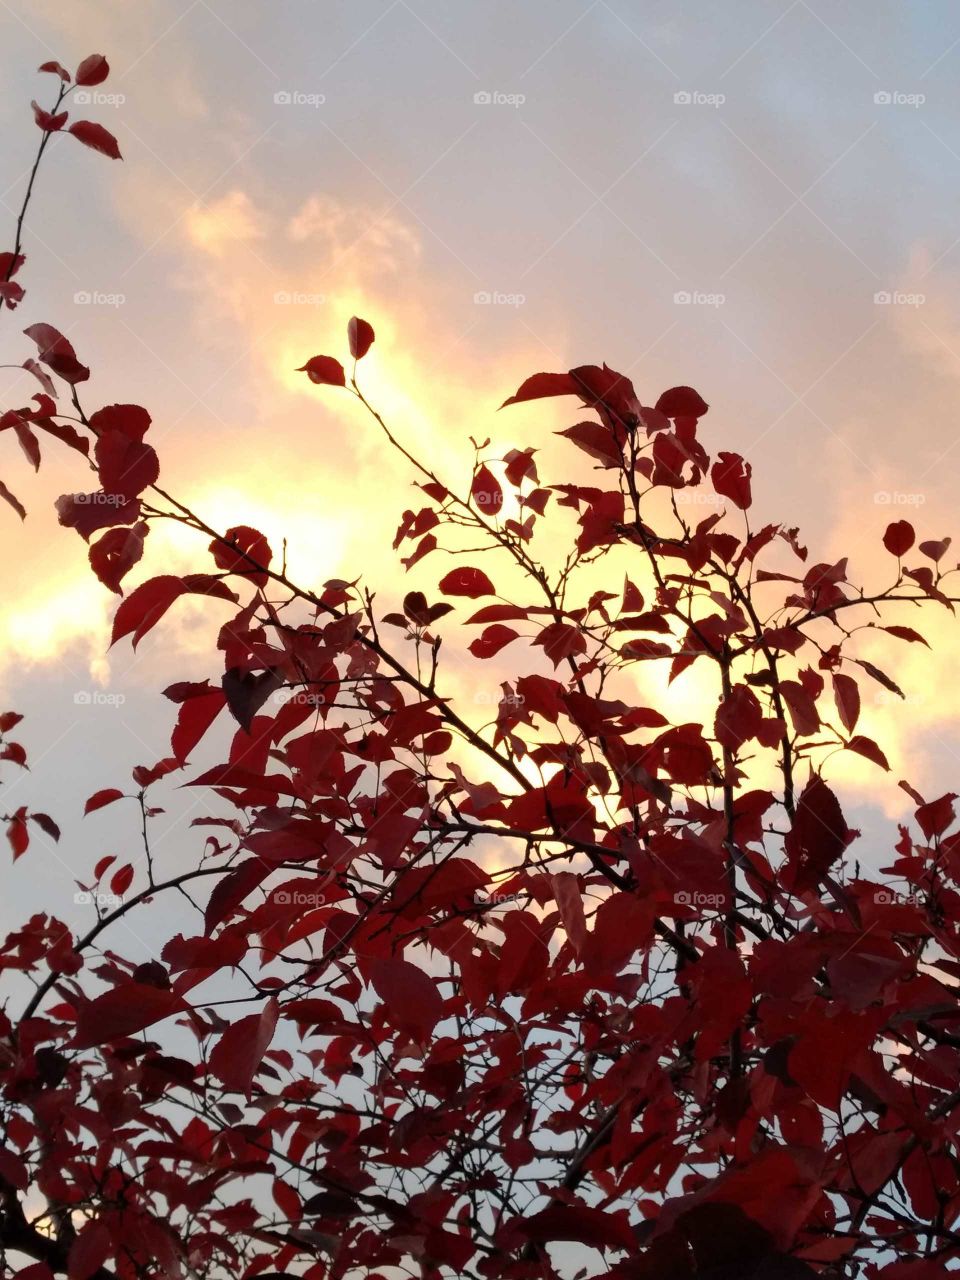 Another fiery sunset backlights a vibrant red bush in such a way that the branches appear to be on fire without being consumed! This photo follows the last as the sky glows ever brighter, making the branch appear even more aflame!